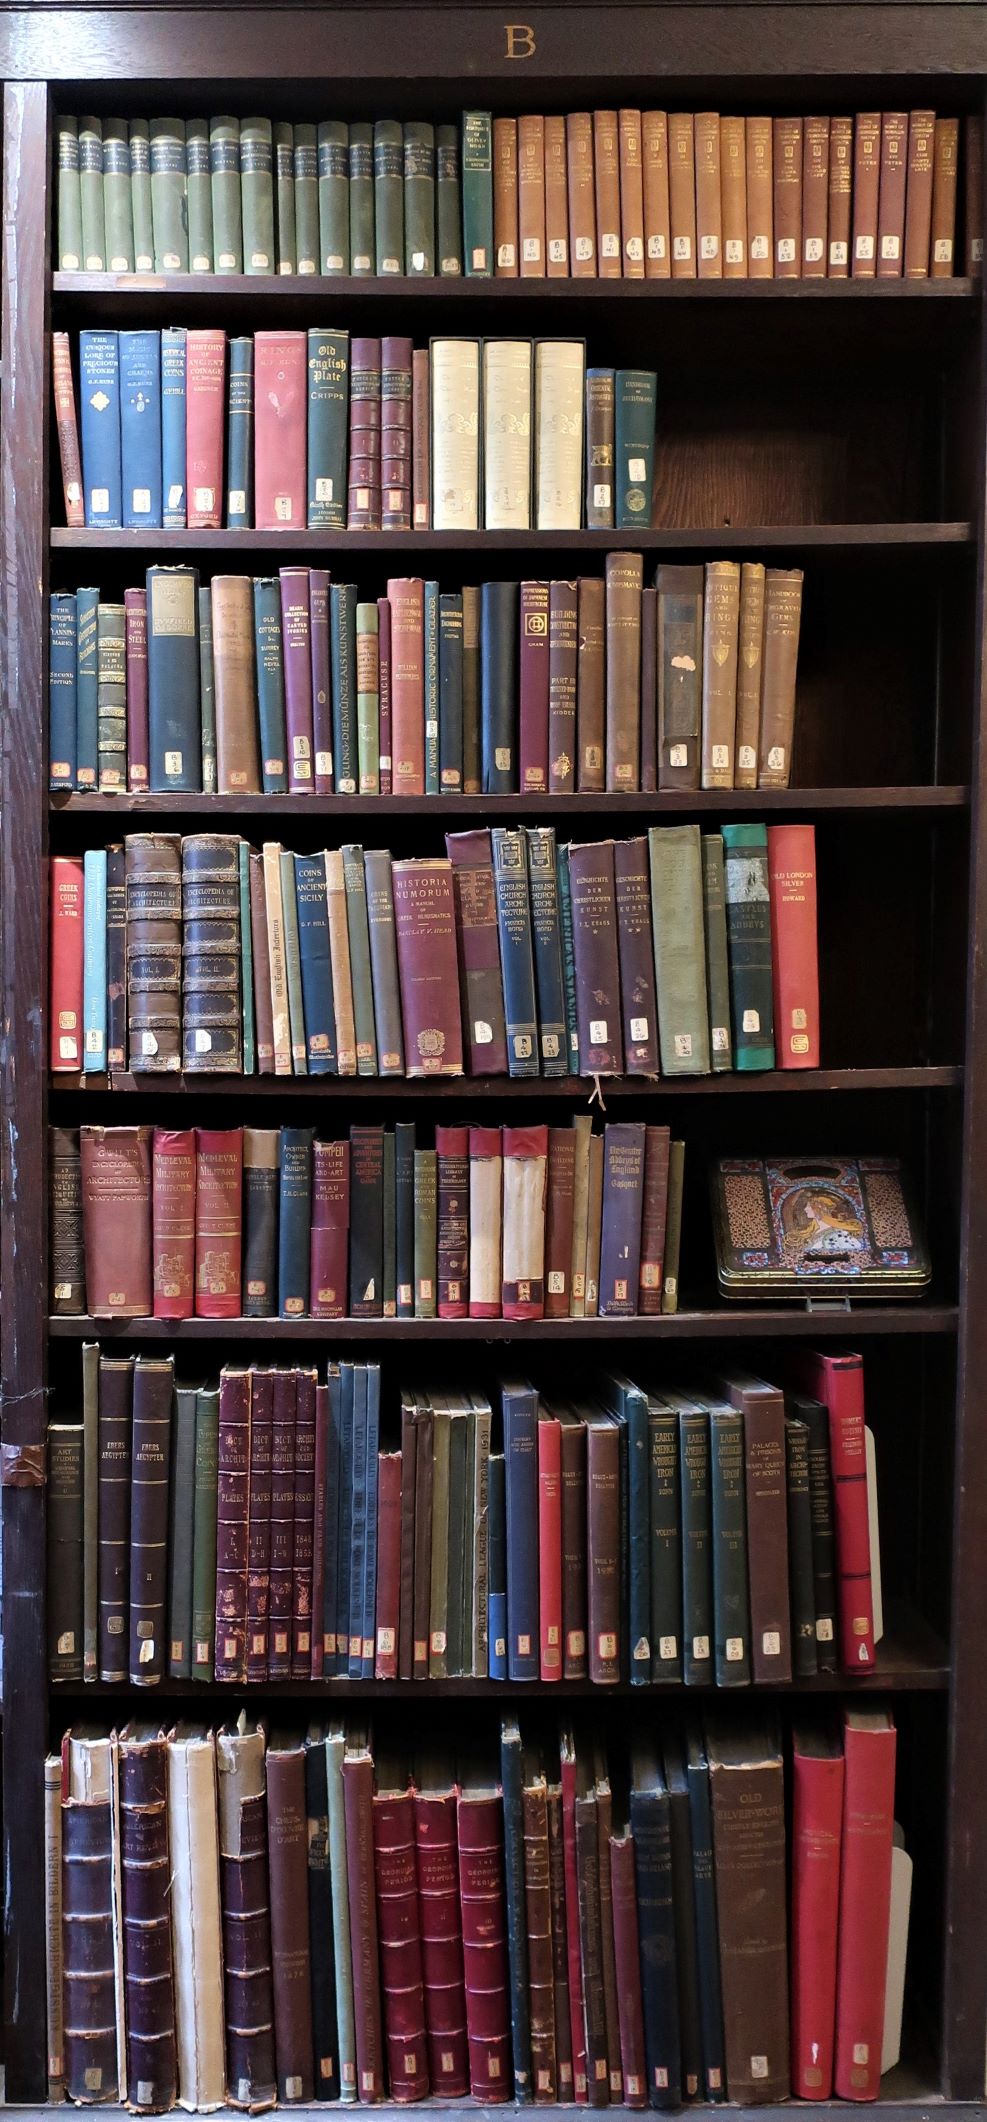 A vertical shot of a library bookshelf after some much needed dusting. Worn spines face the viewer, and a square slab featuring the profile of a woman by Alphonse Mucha is displayed on a middle shelf.